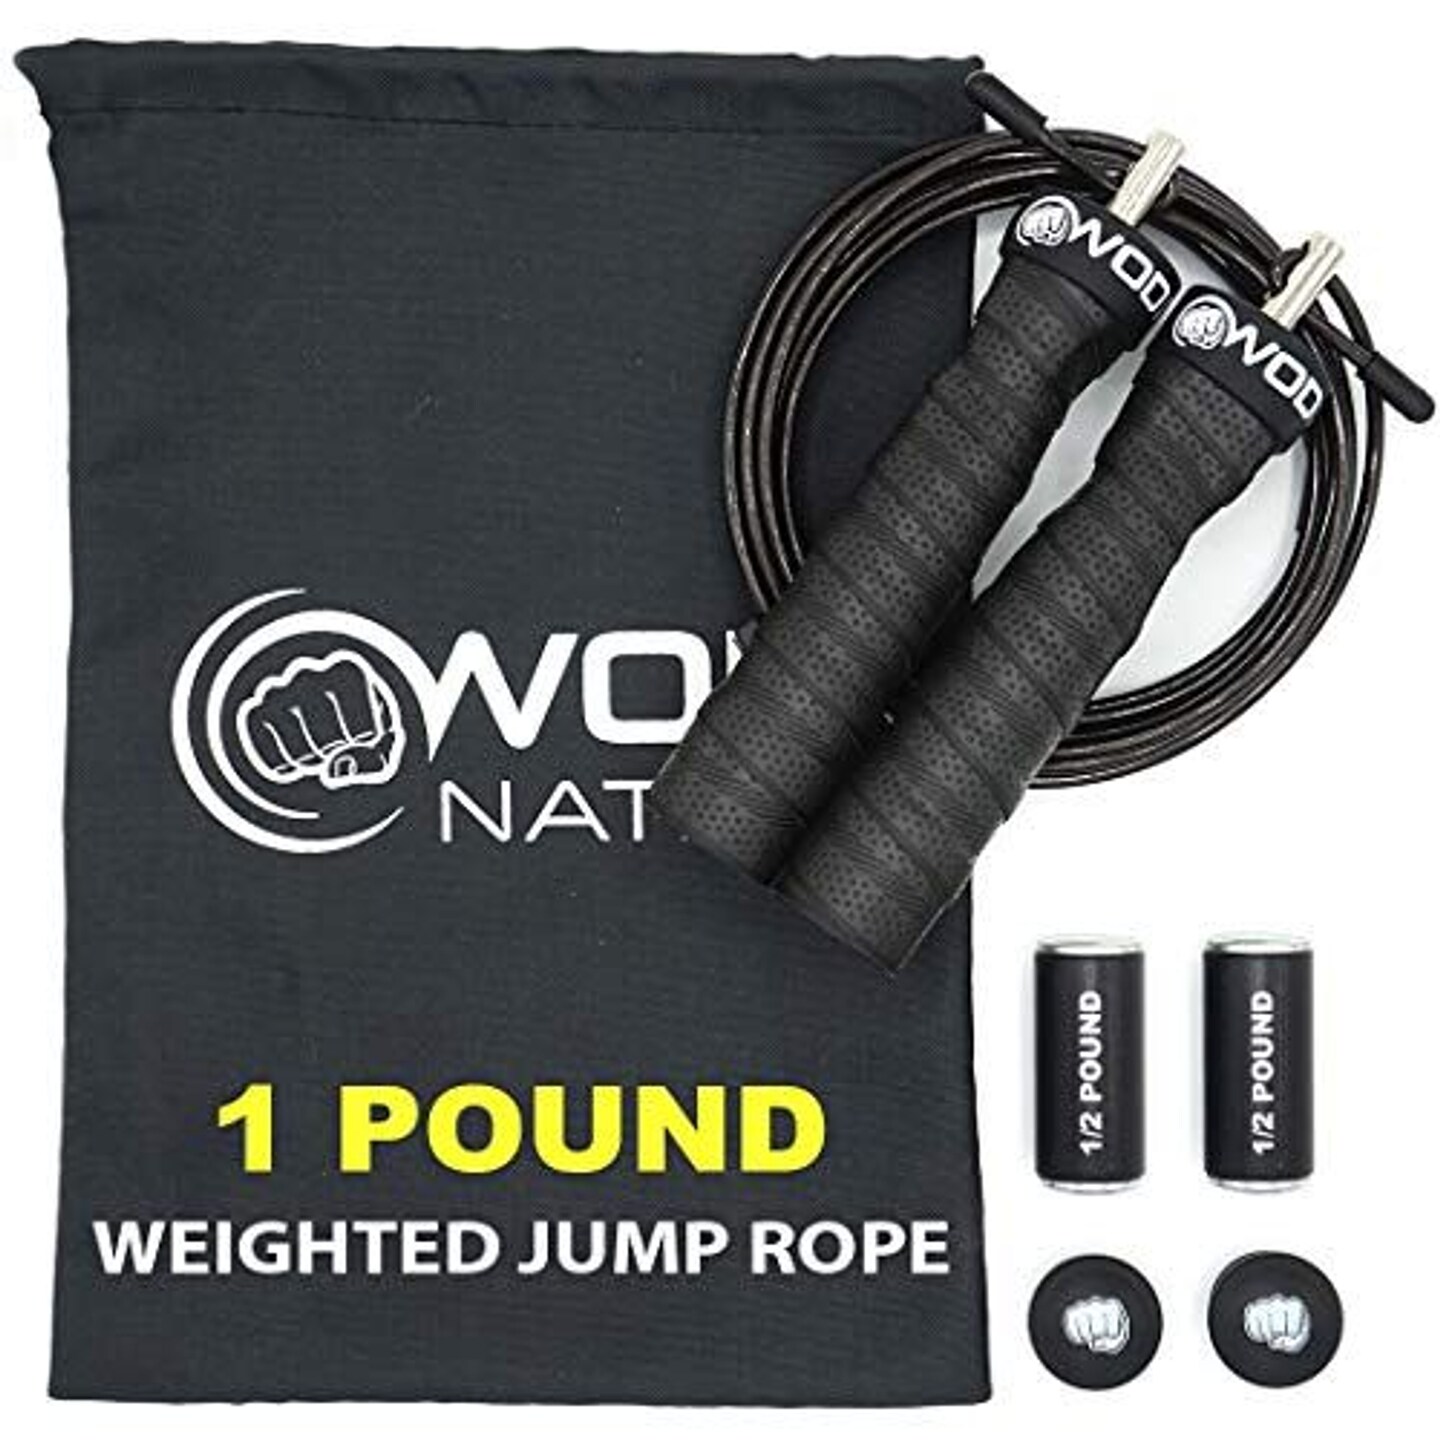 Weighted Jump Rope for Women &#x26; Men - 1 Pound (1LB) Adjustable Heavy Speed Jump Rope Handles with Removable Weights, Cross Training, Boxing.